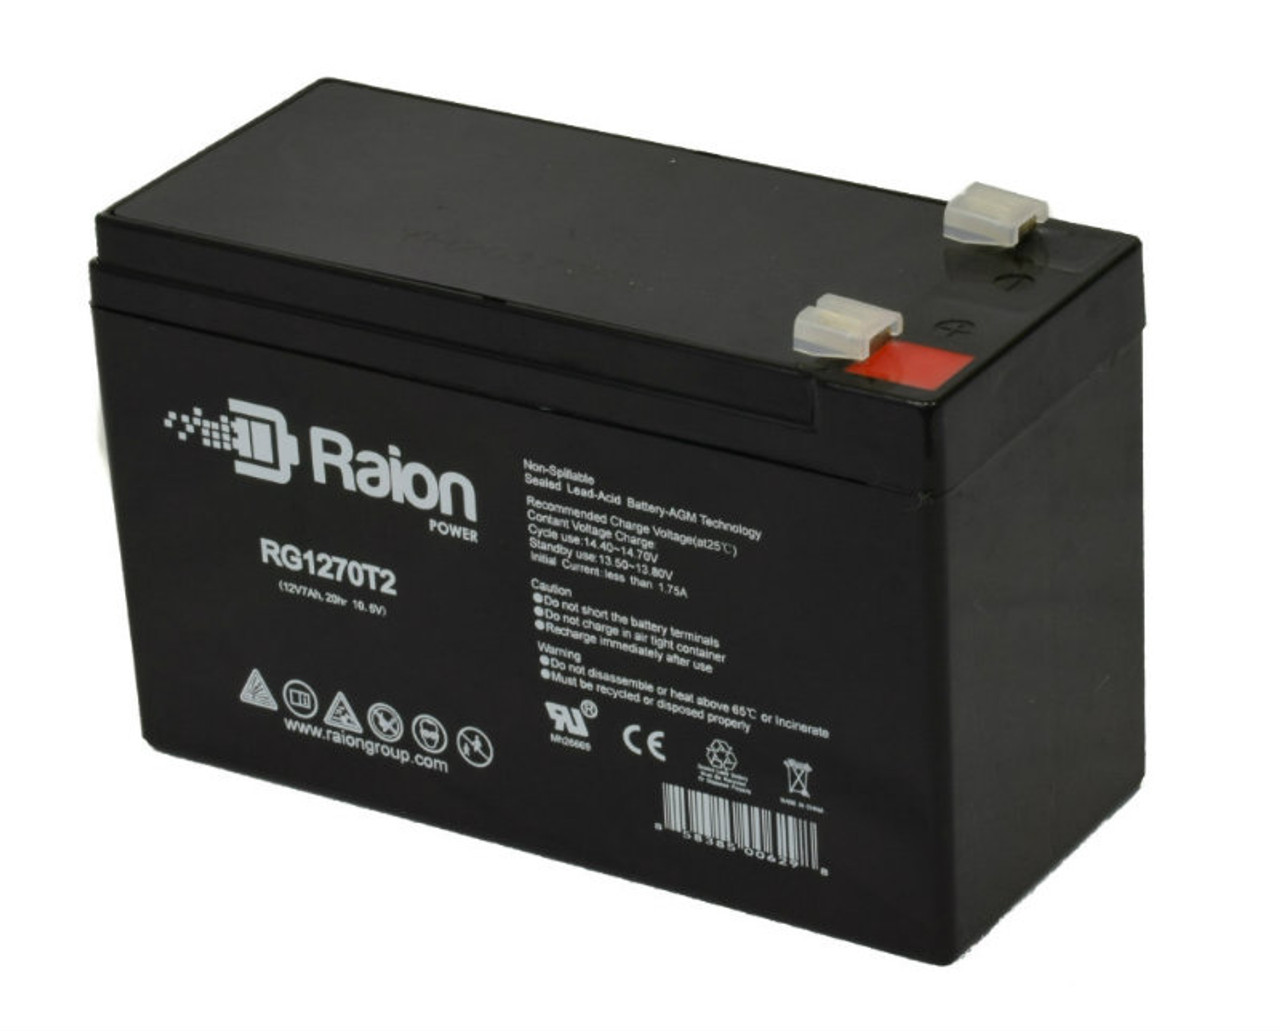 Raion Power RG1270T2 12V 7Ah Rechargeable Battery for Exide EP7-12